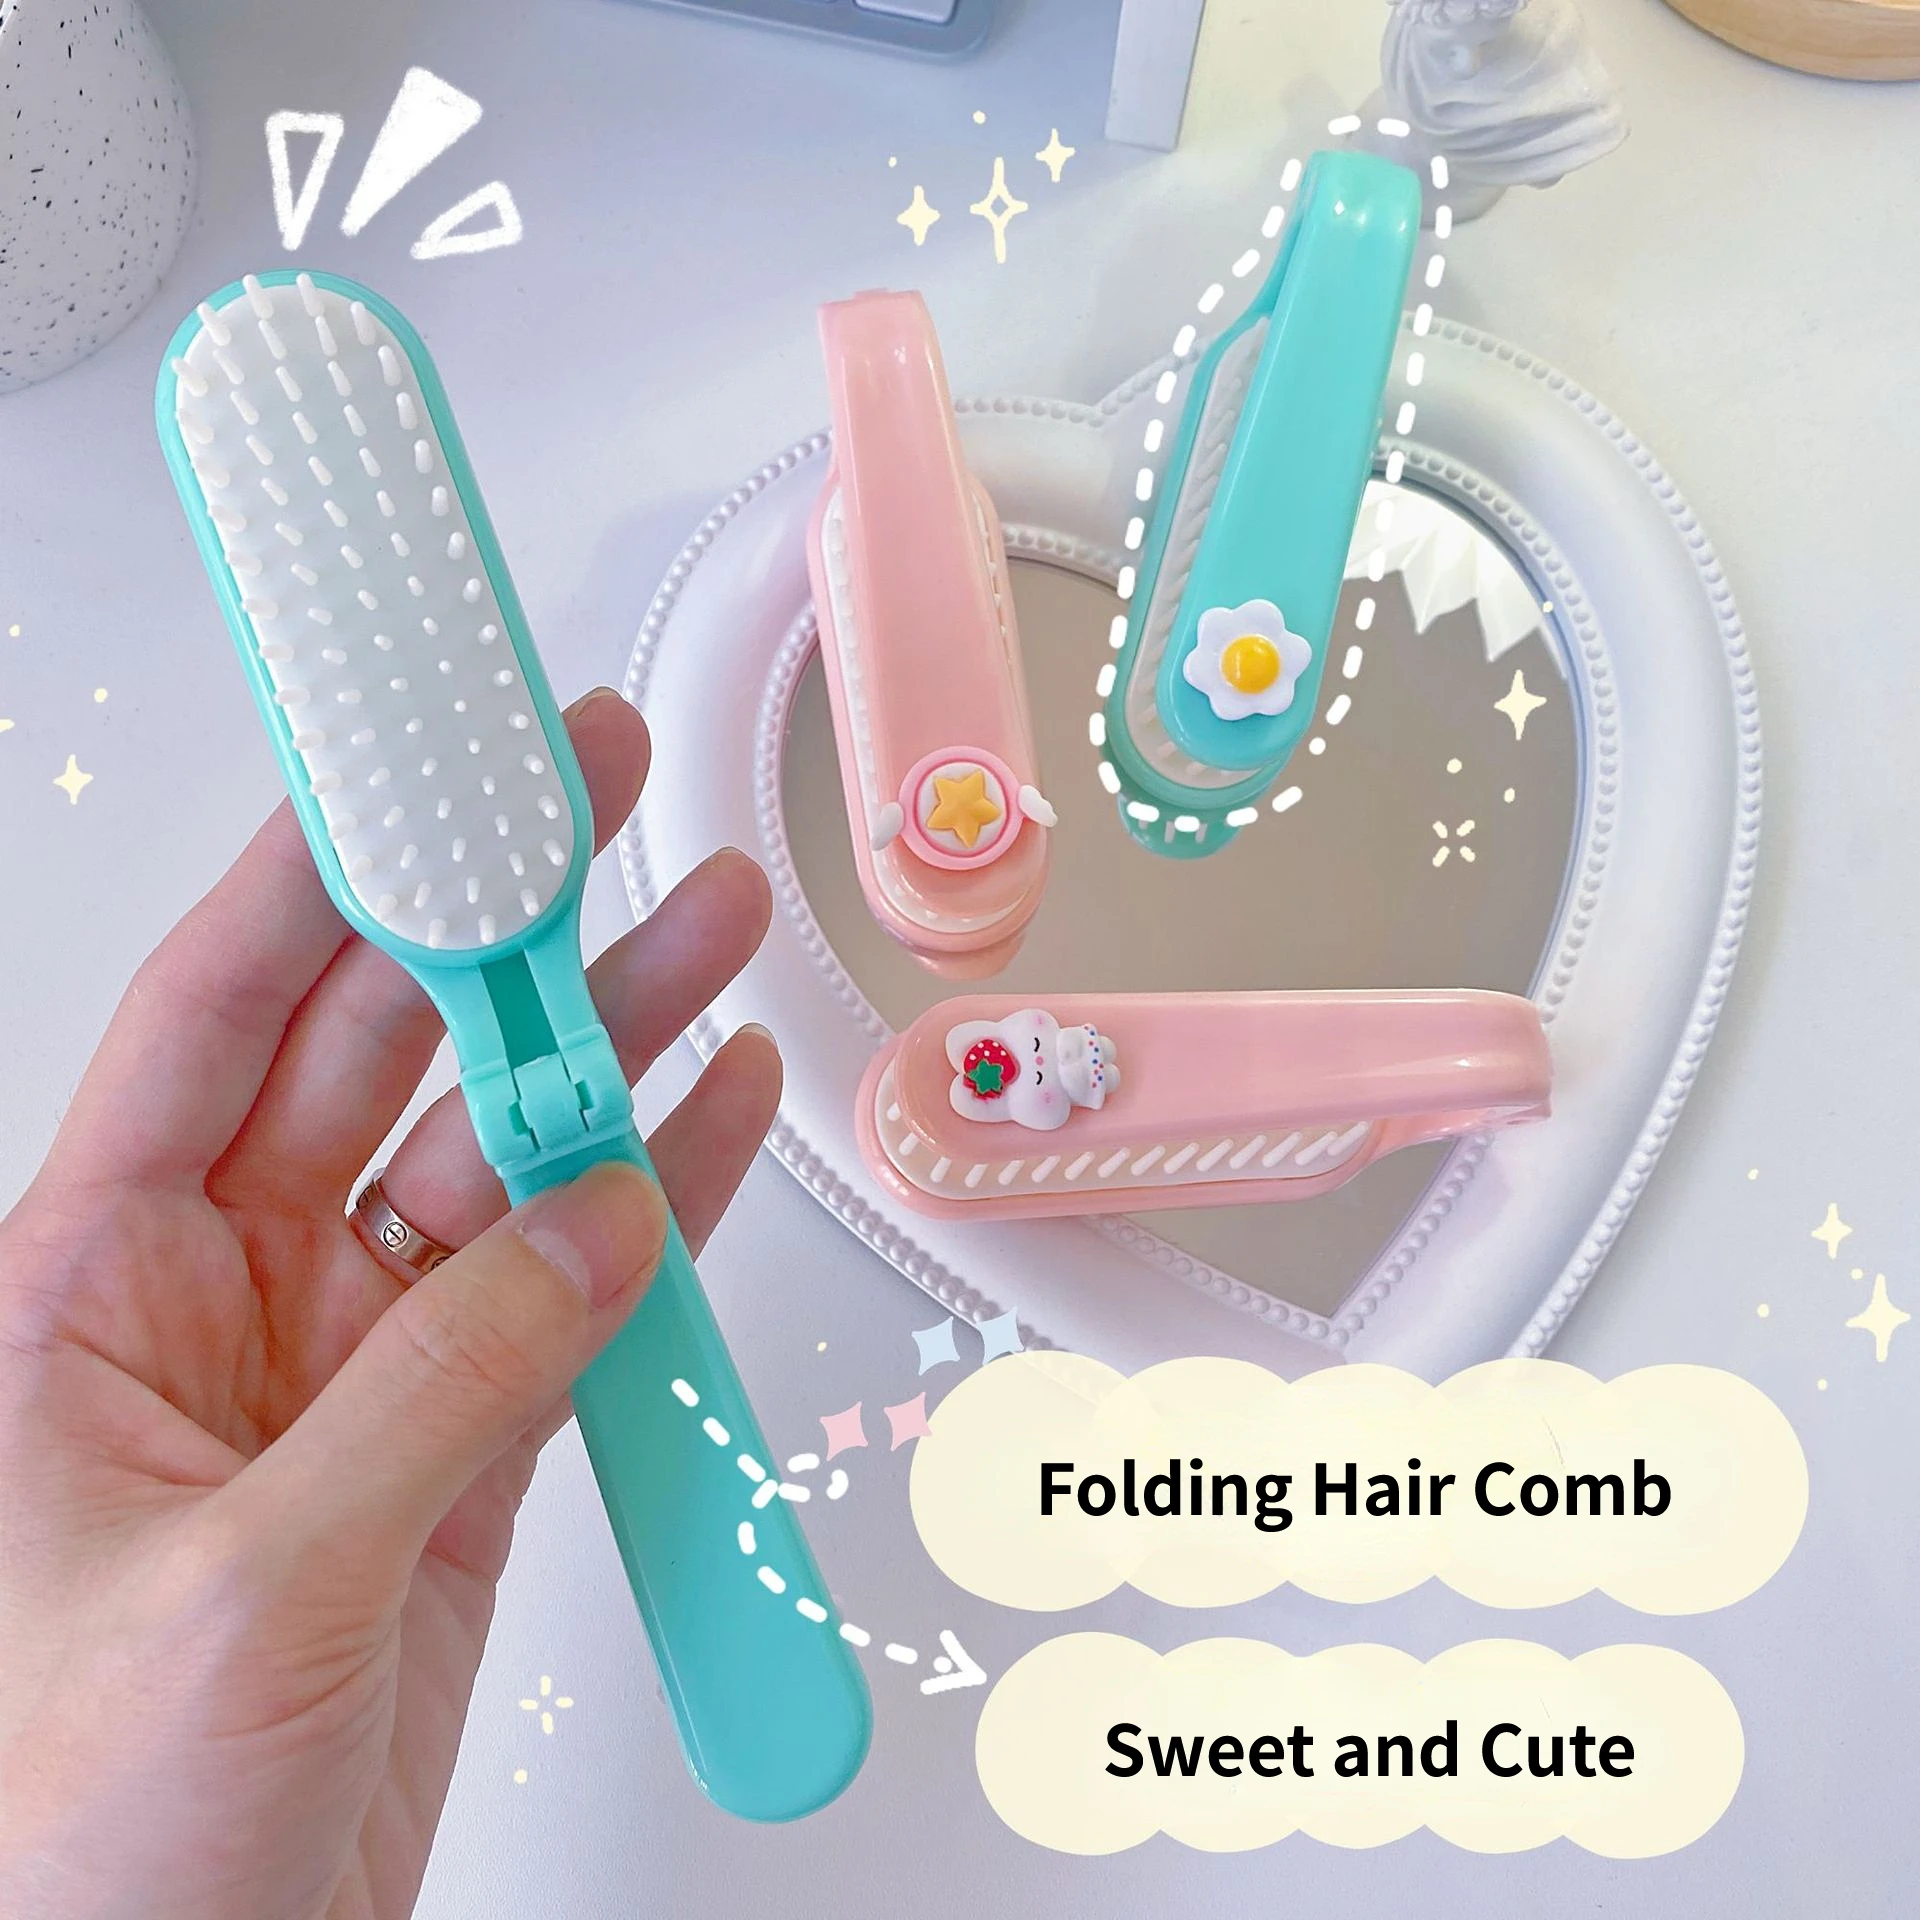 

Cartoon Folding Hair Comb Protable Pocket Small Size Traveling Massage Folding Hair Comb Women Hair Brushes Hair Styling Tools